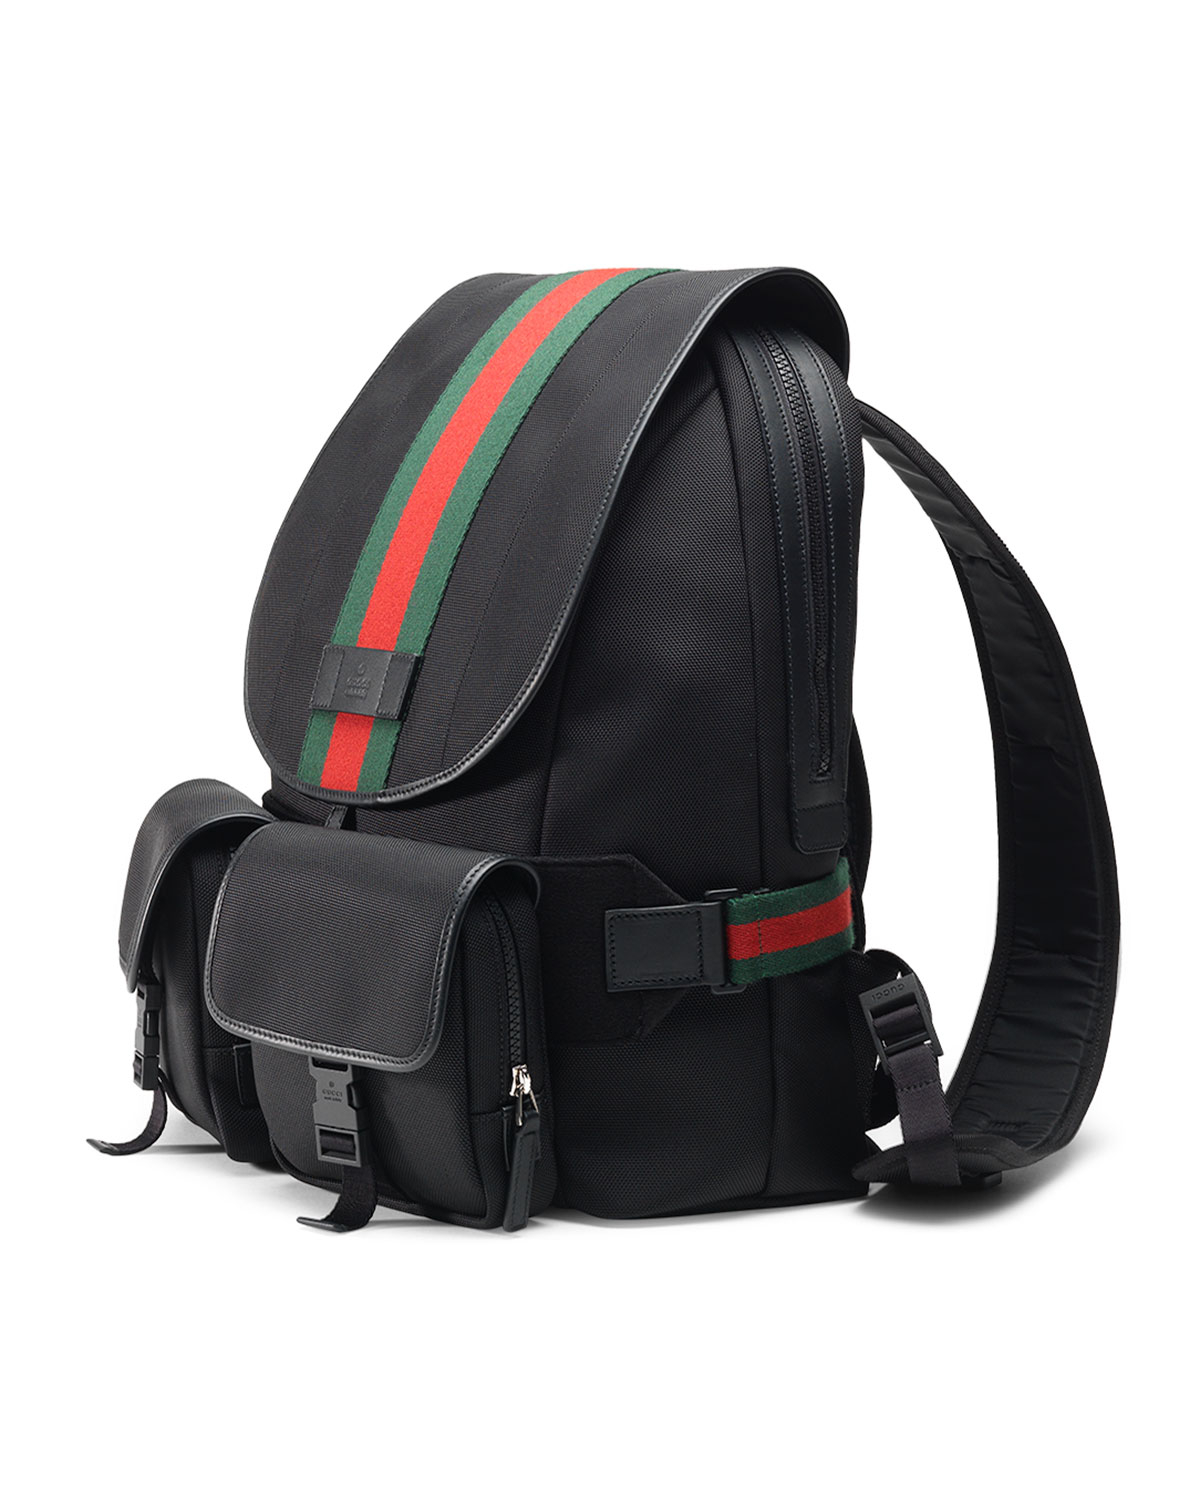 Gucci Web Canvas Backpack/Fanny Pack in Black for Men - Lyst